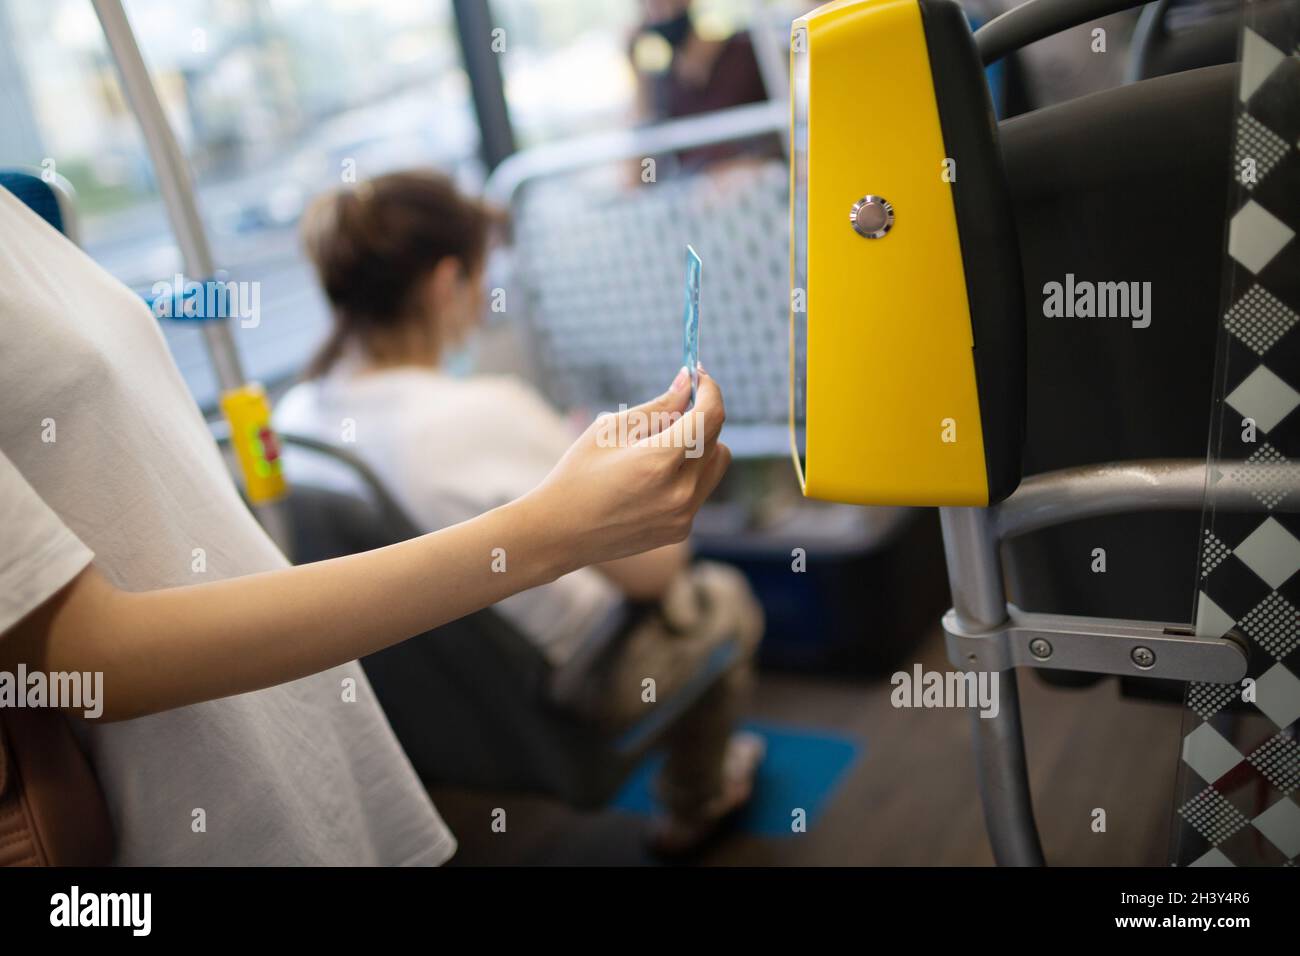 Asian woman paying conctactless with plastic card for the public transport in bus Stock Photo